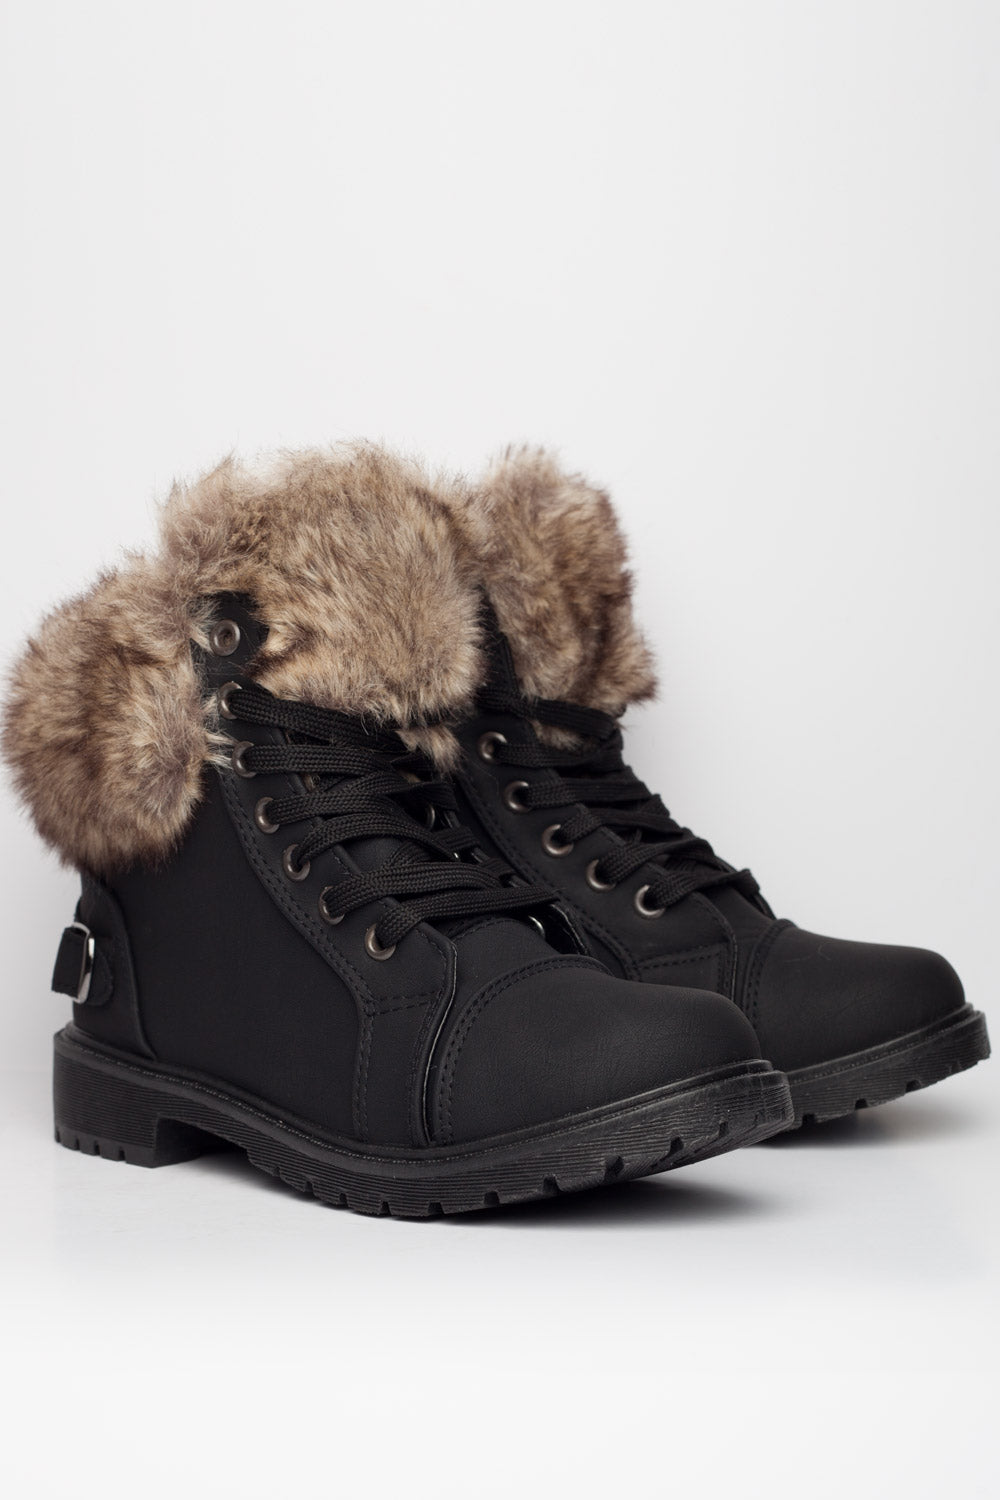 black boots with fur lining